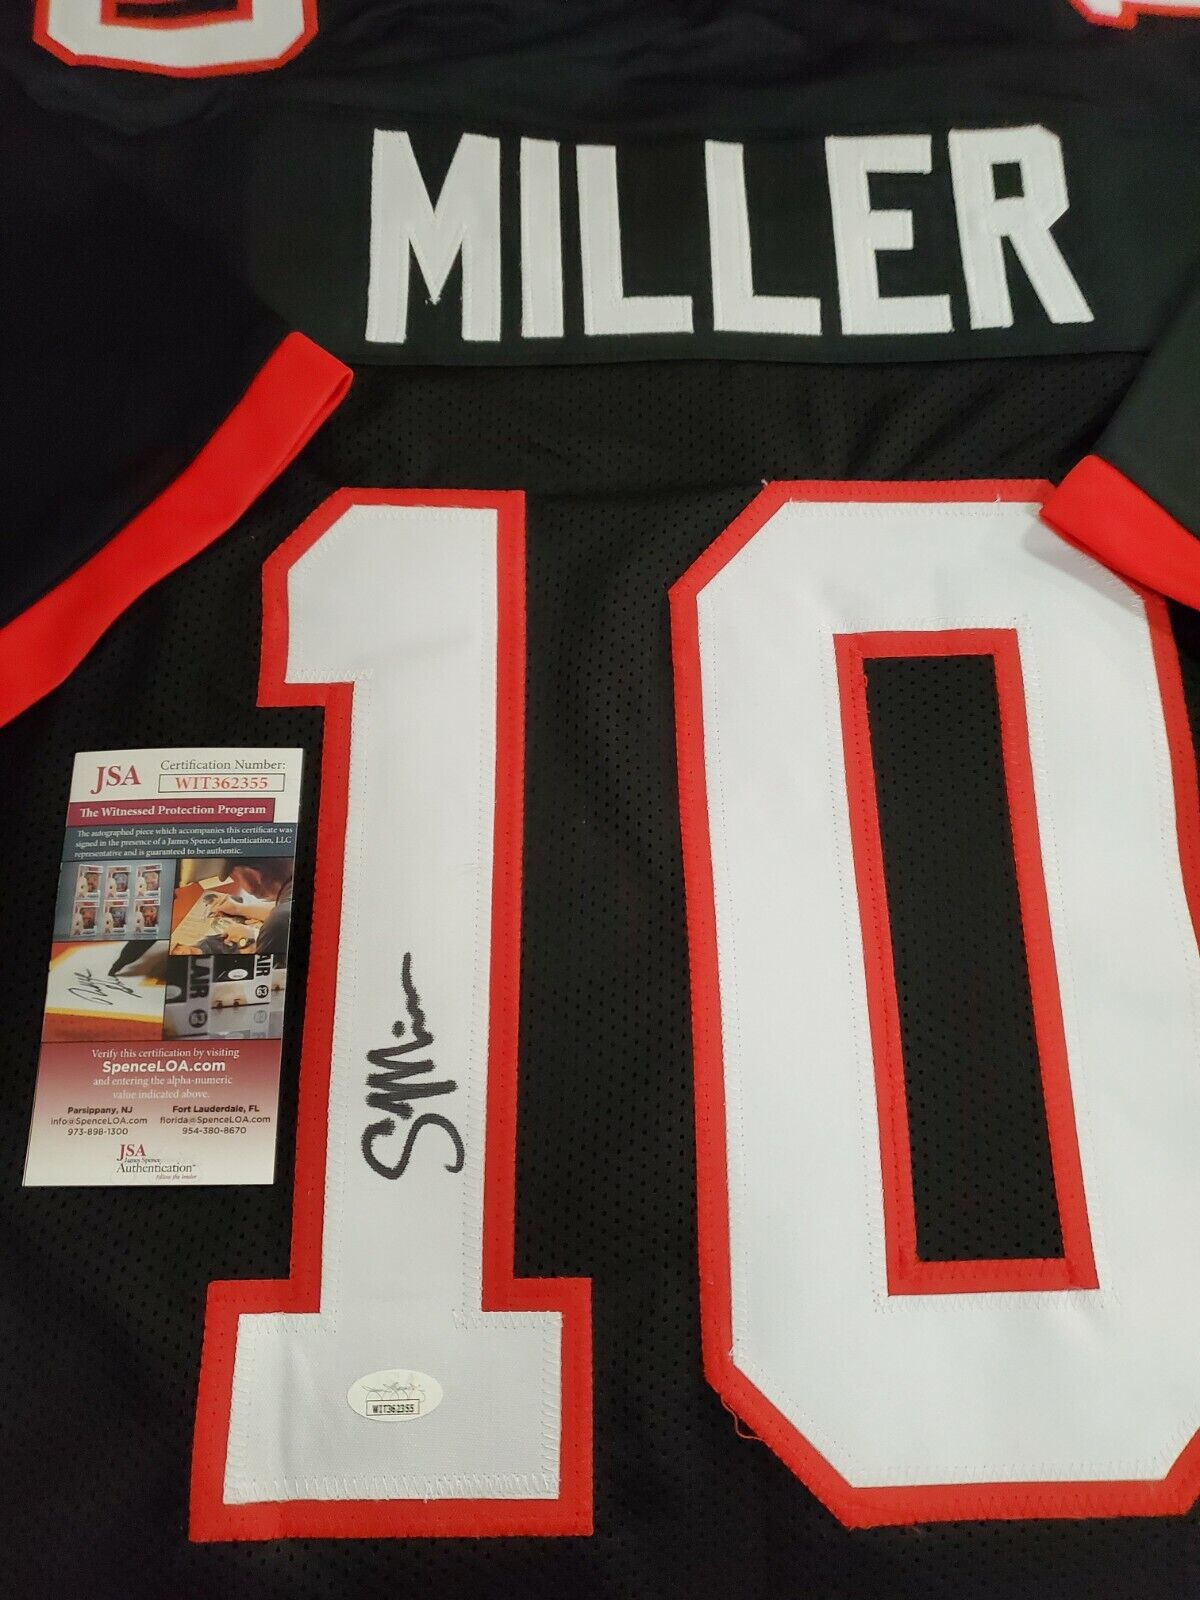 Scotty Miller Autographed Signed Tampa Bay Buccaneers Jersey Jsa